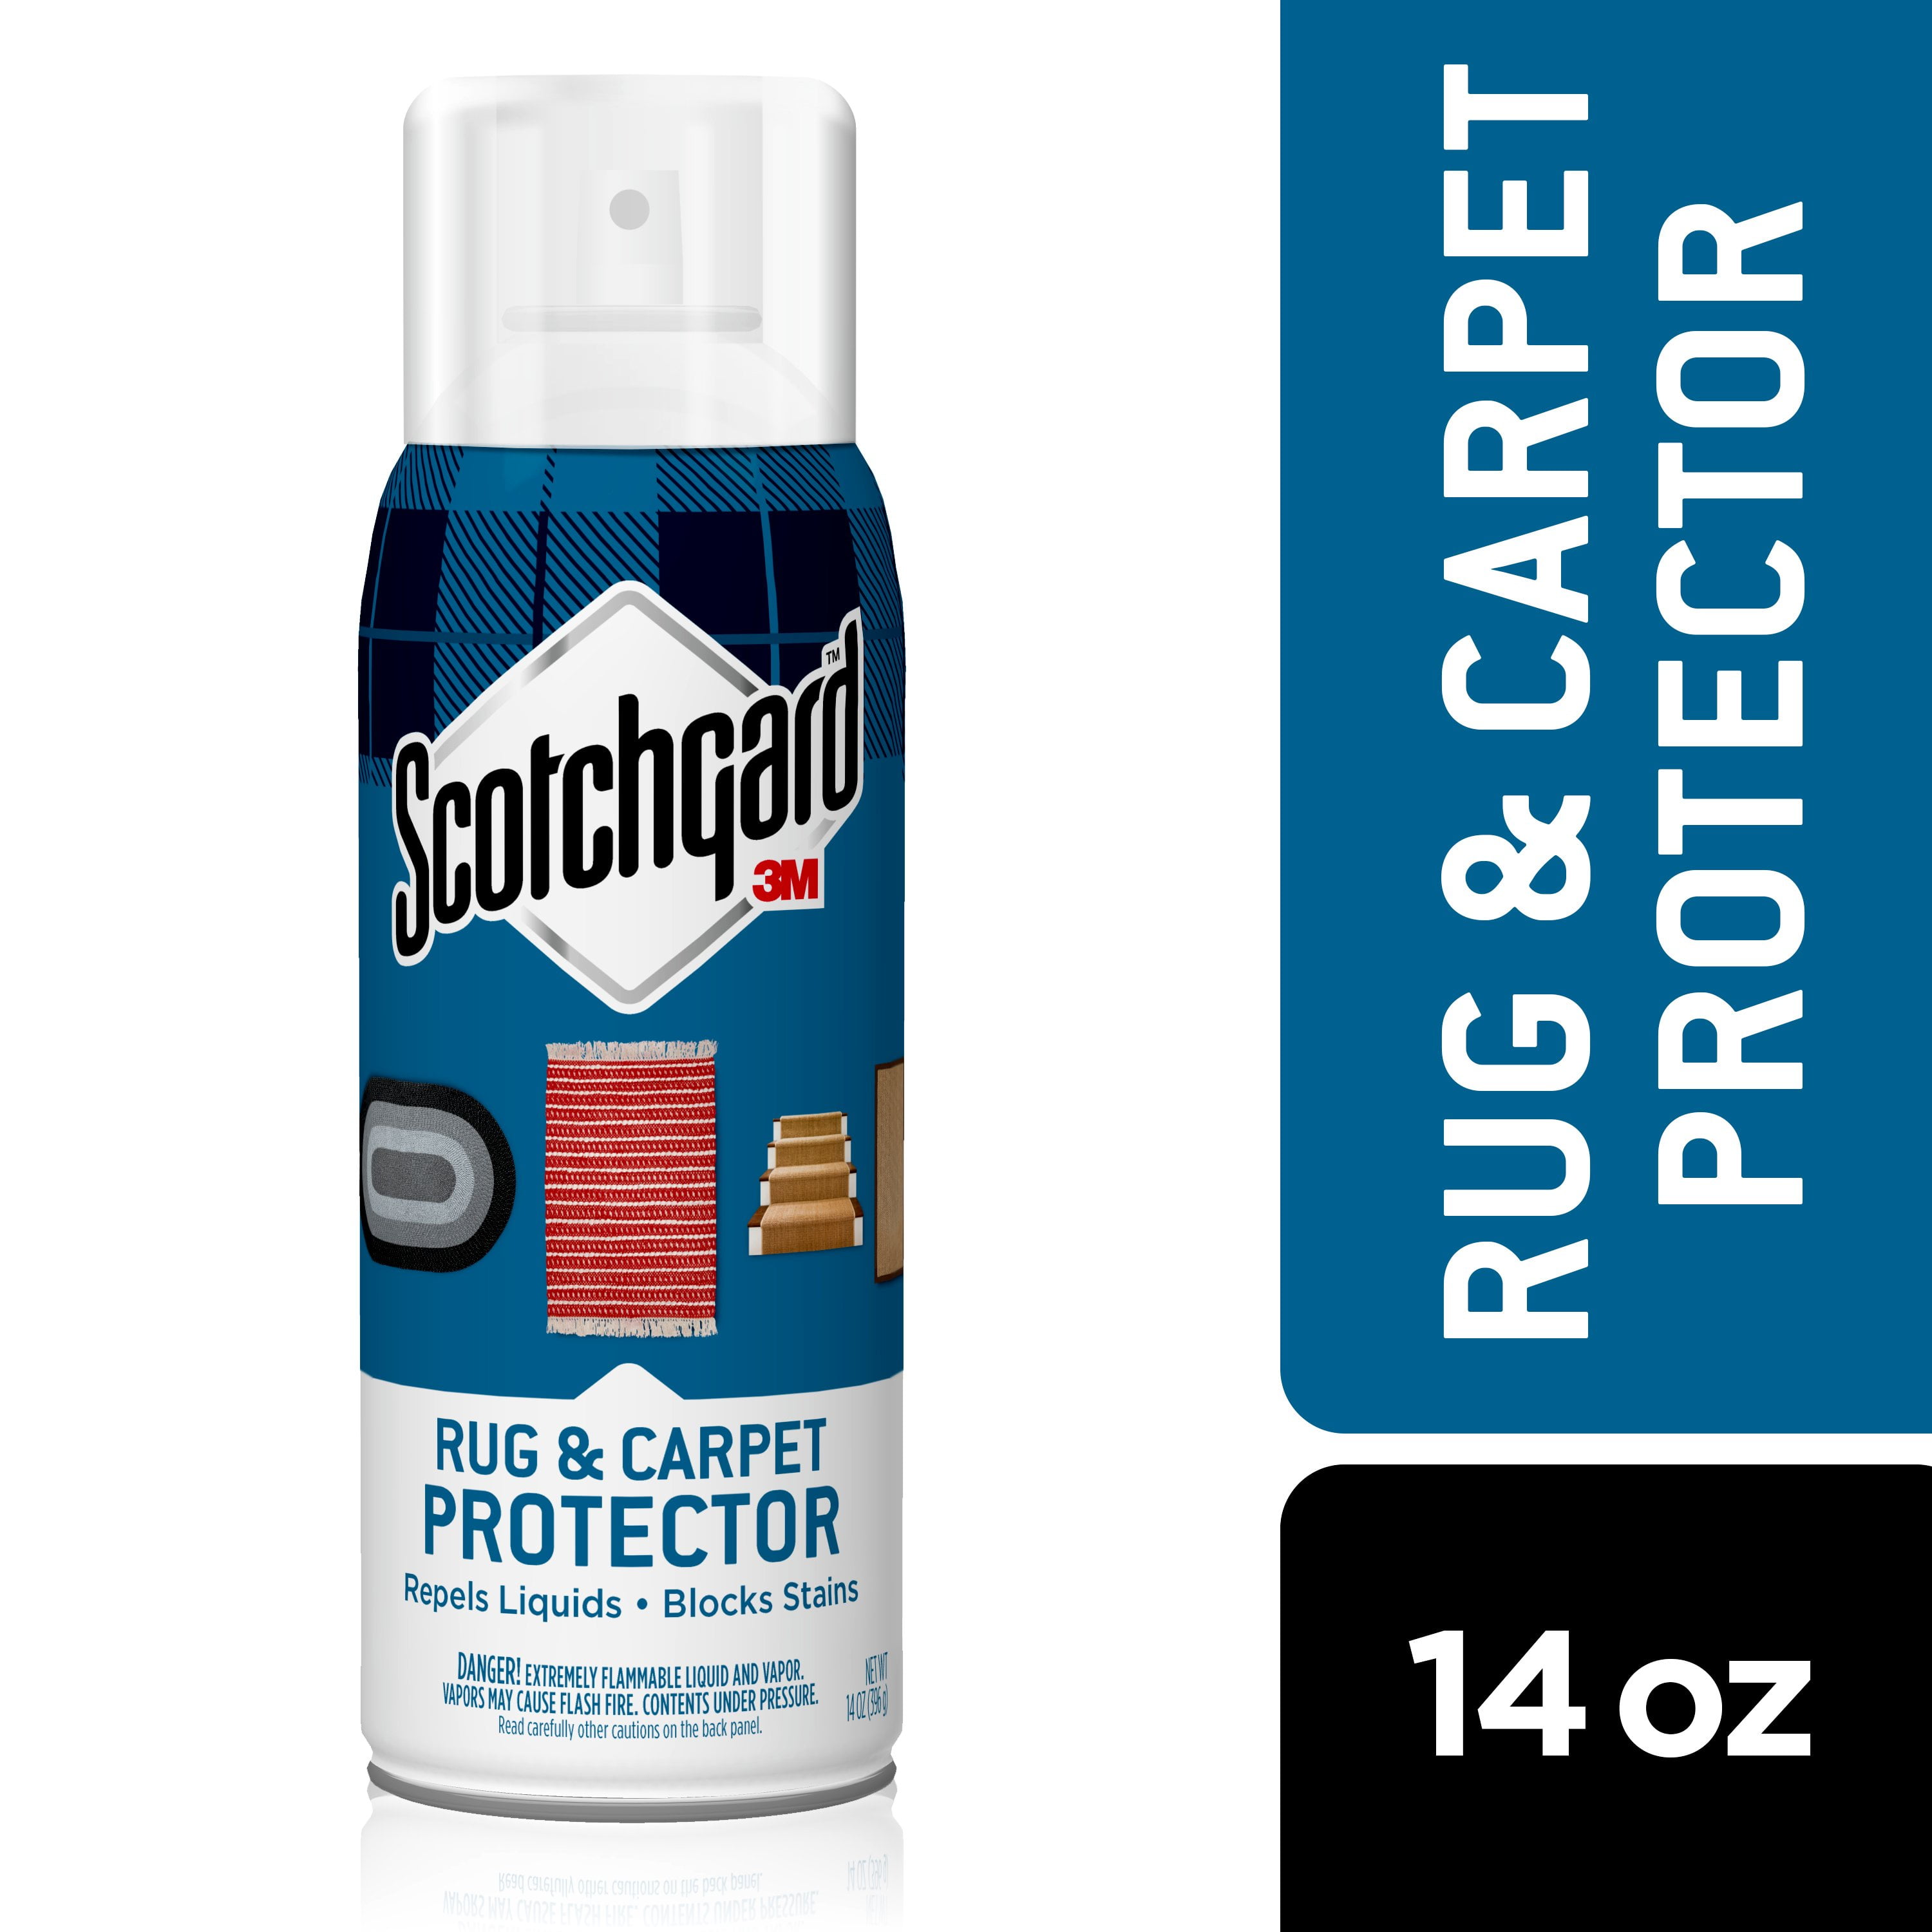 Scotchguard Protection for Carpets Steubenville OH Wintersville OH